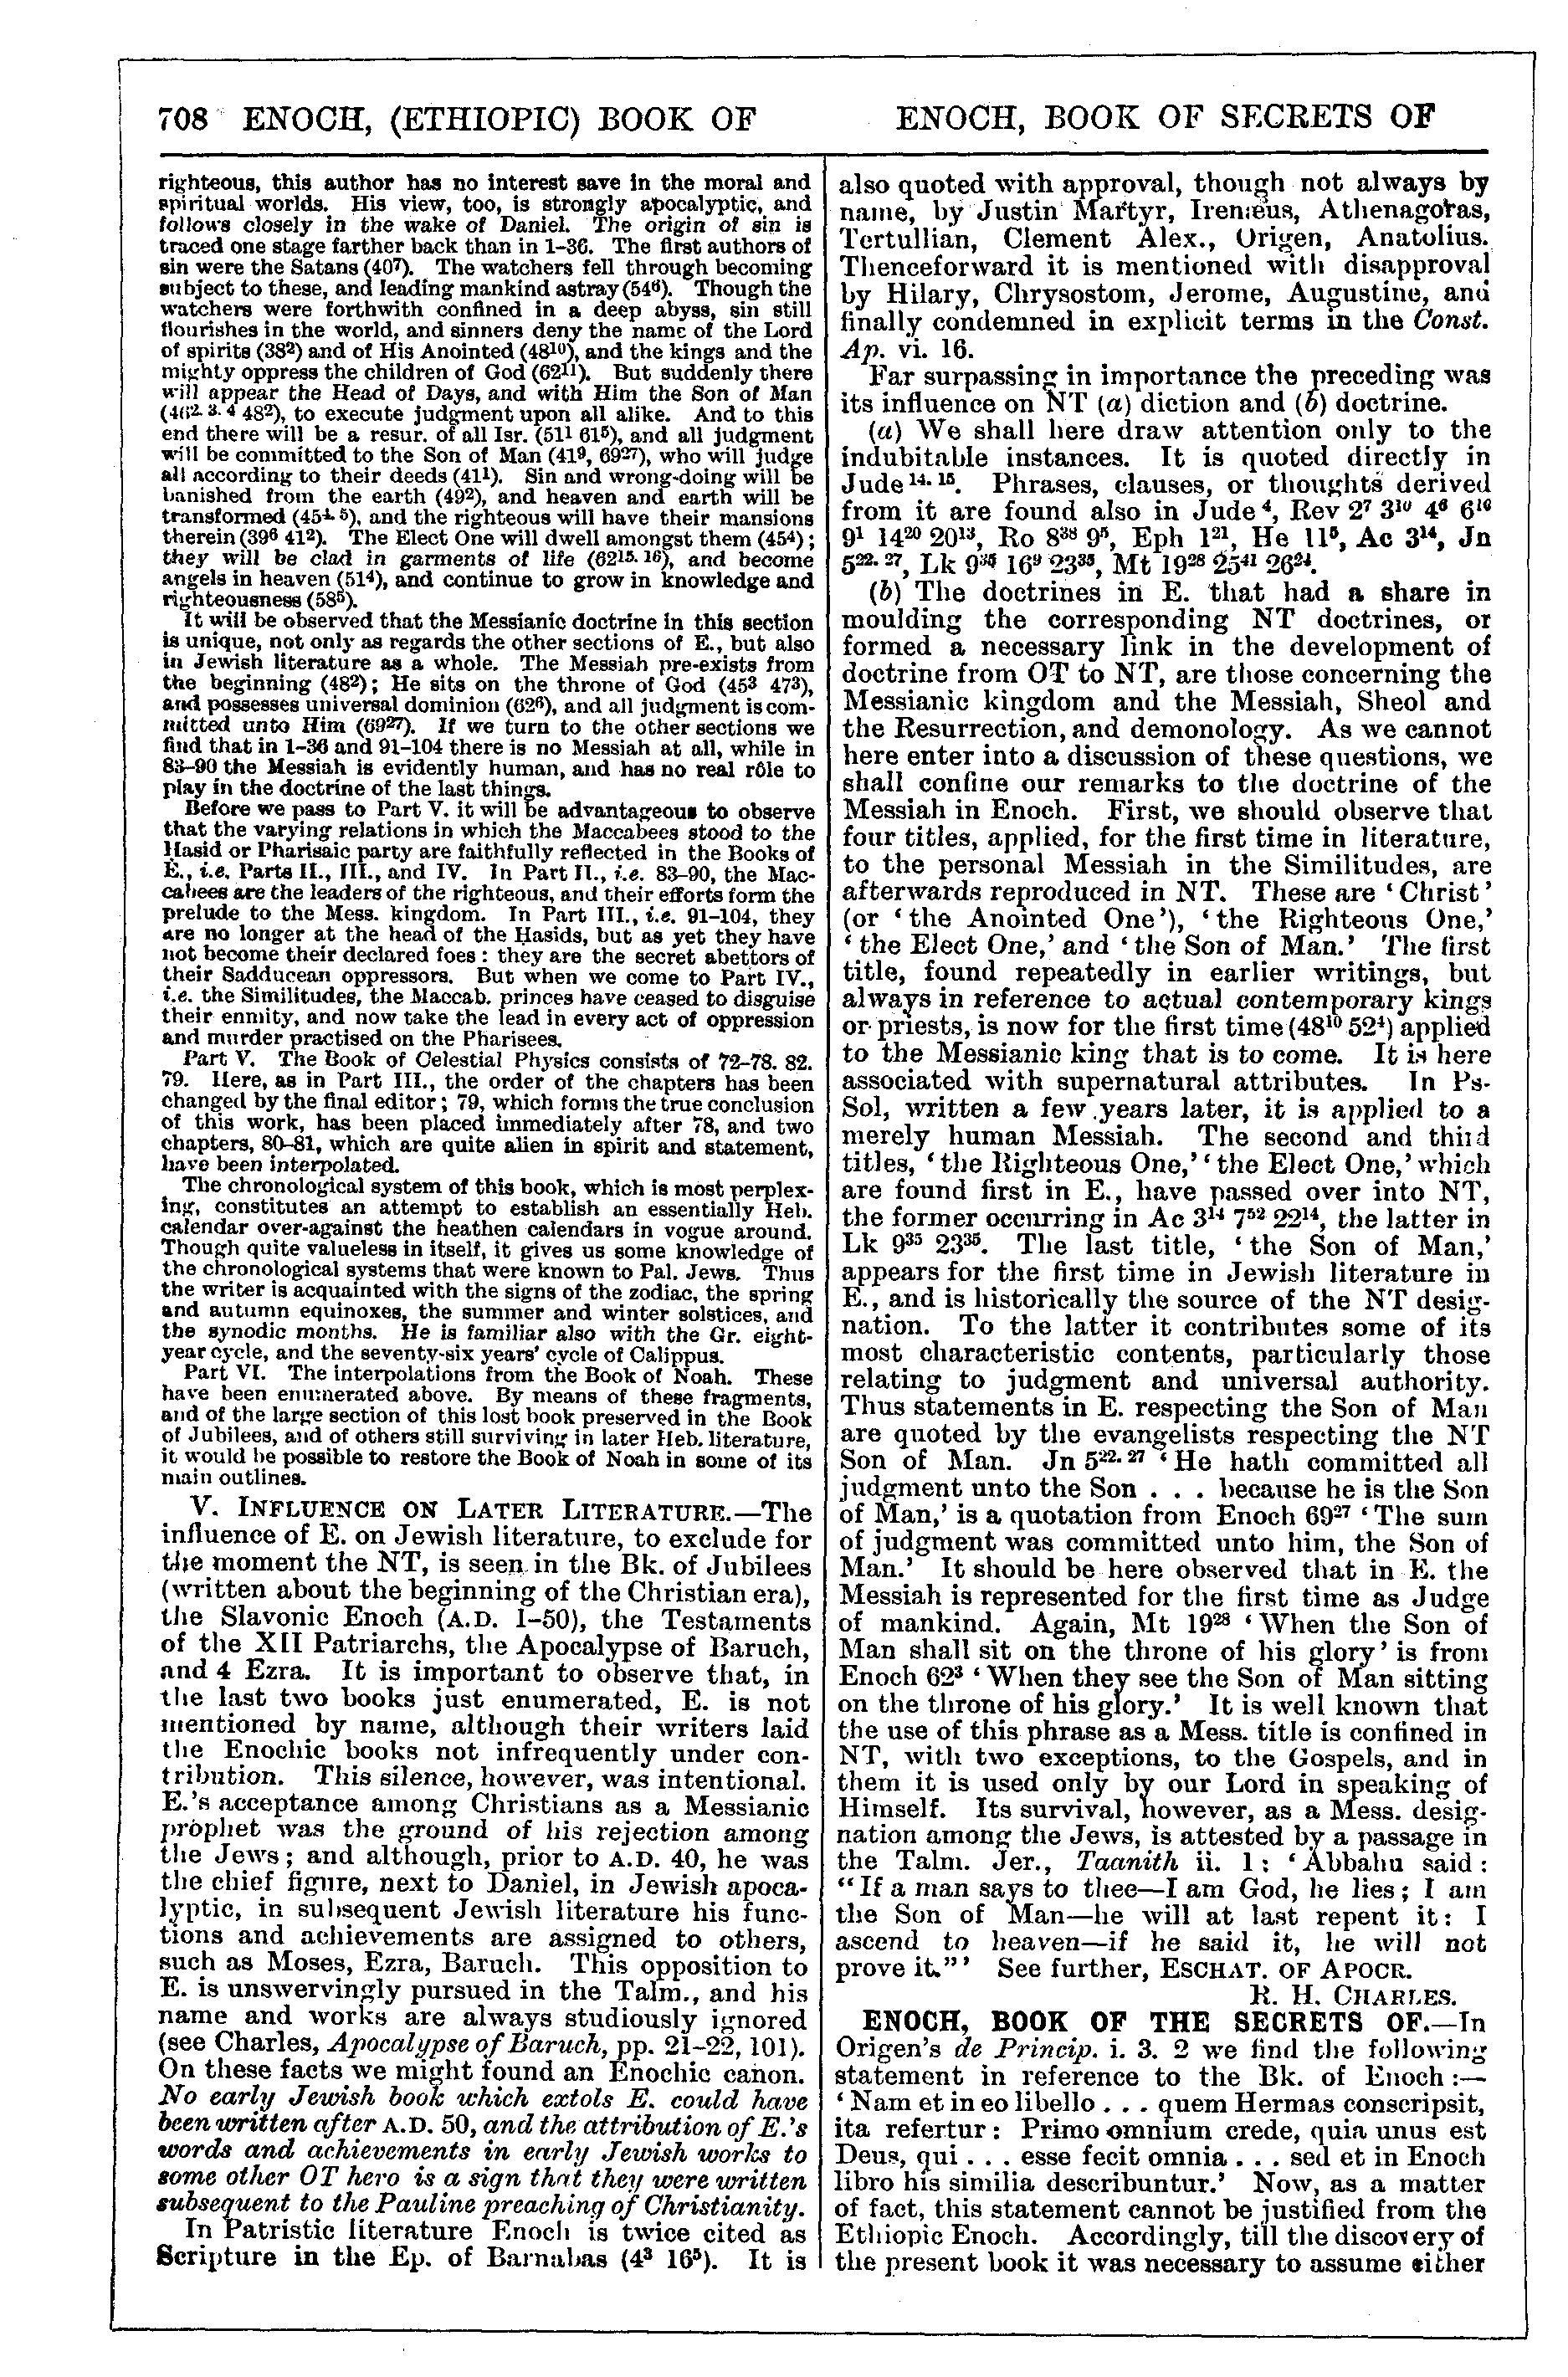 Image of page 708